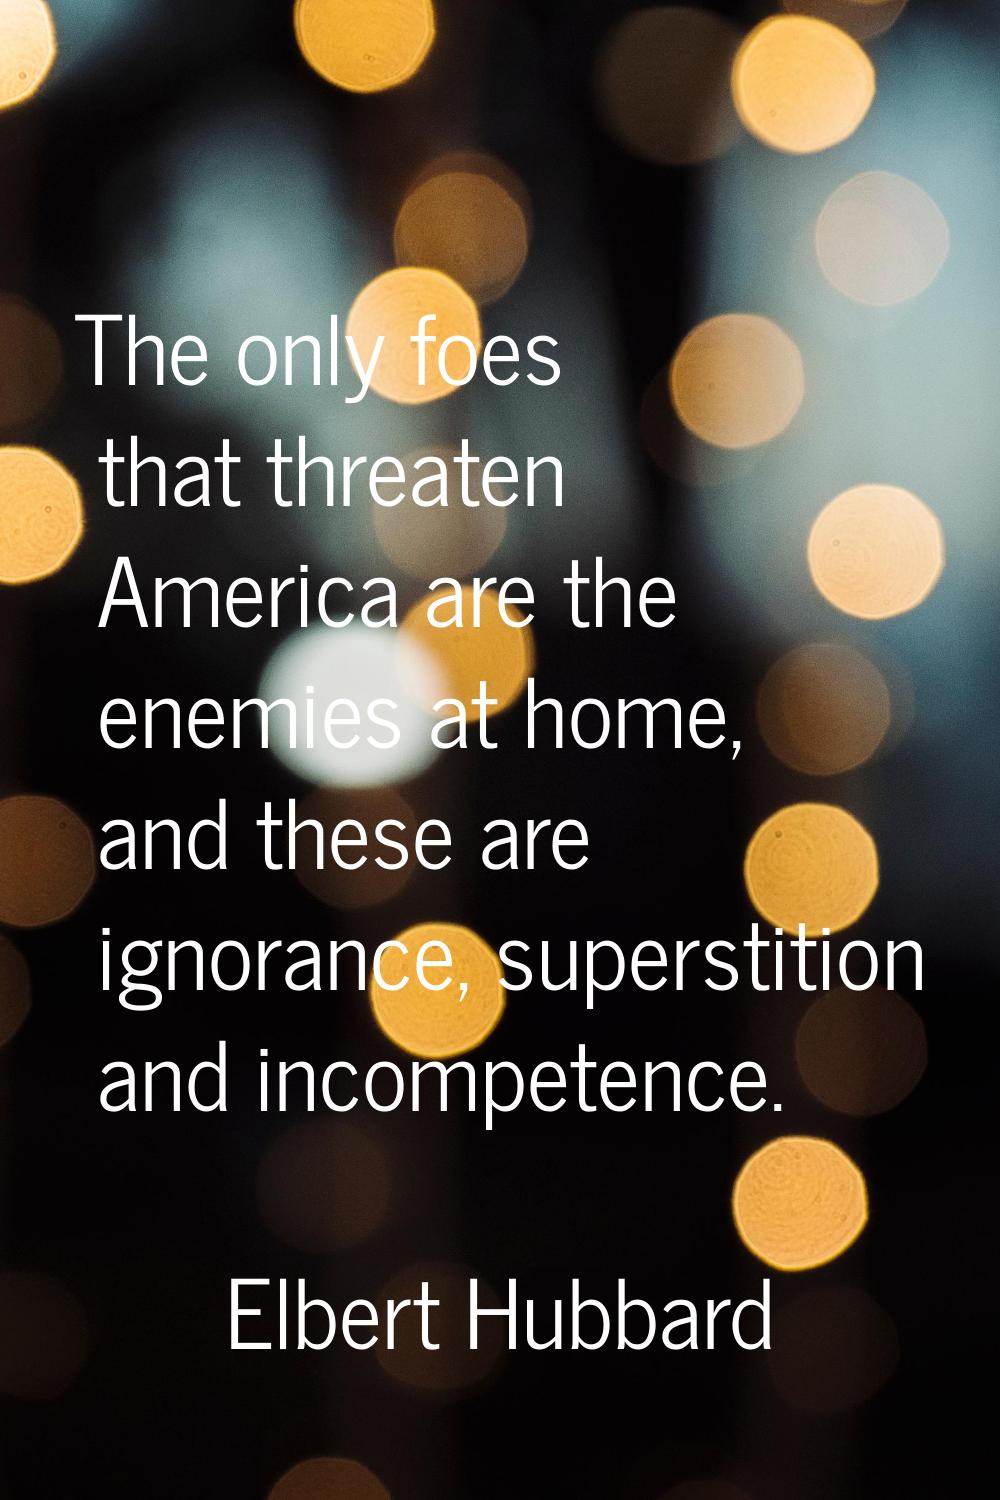 The only foes that threaten America are the enemies at home, and these are ignorance, superstition 